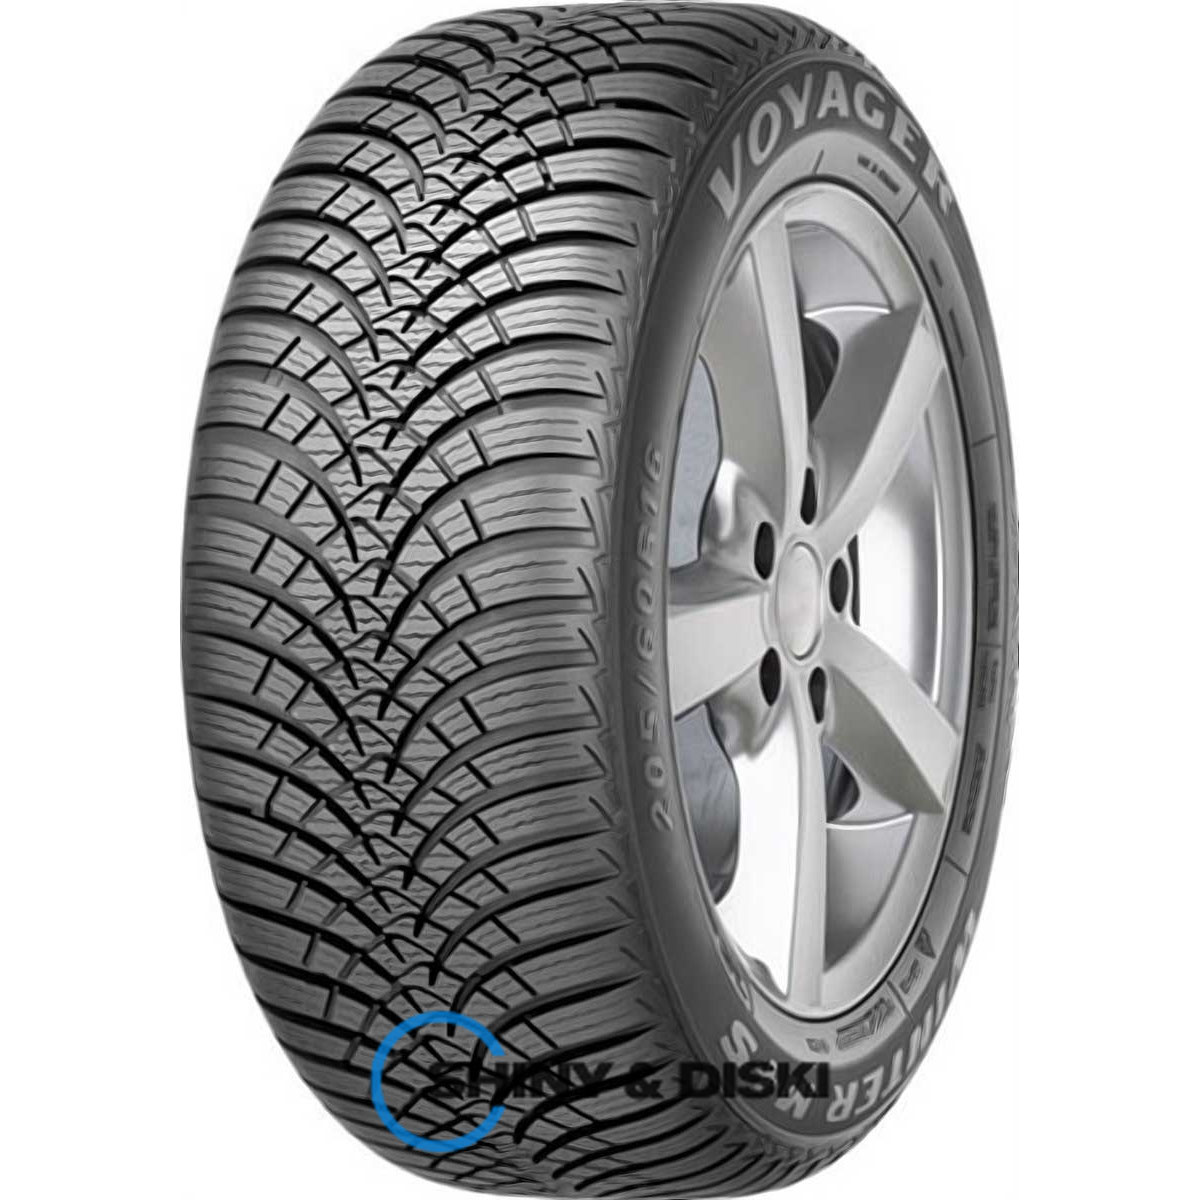 voyager winter 185/60 r14 82t